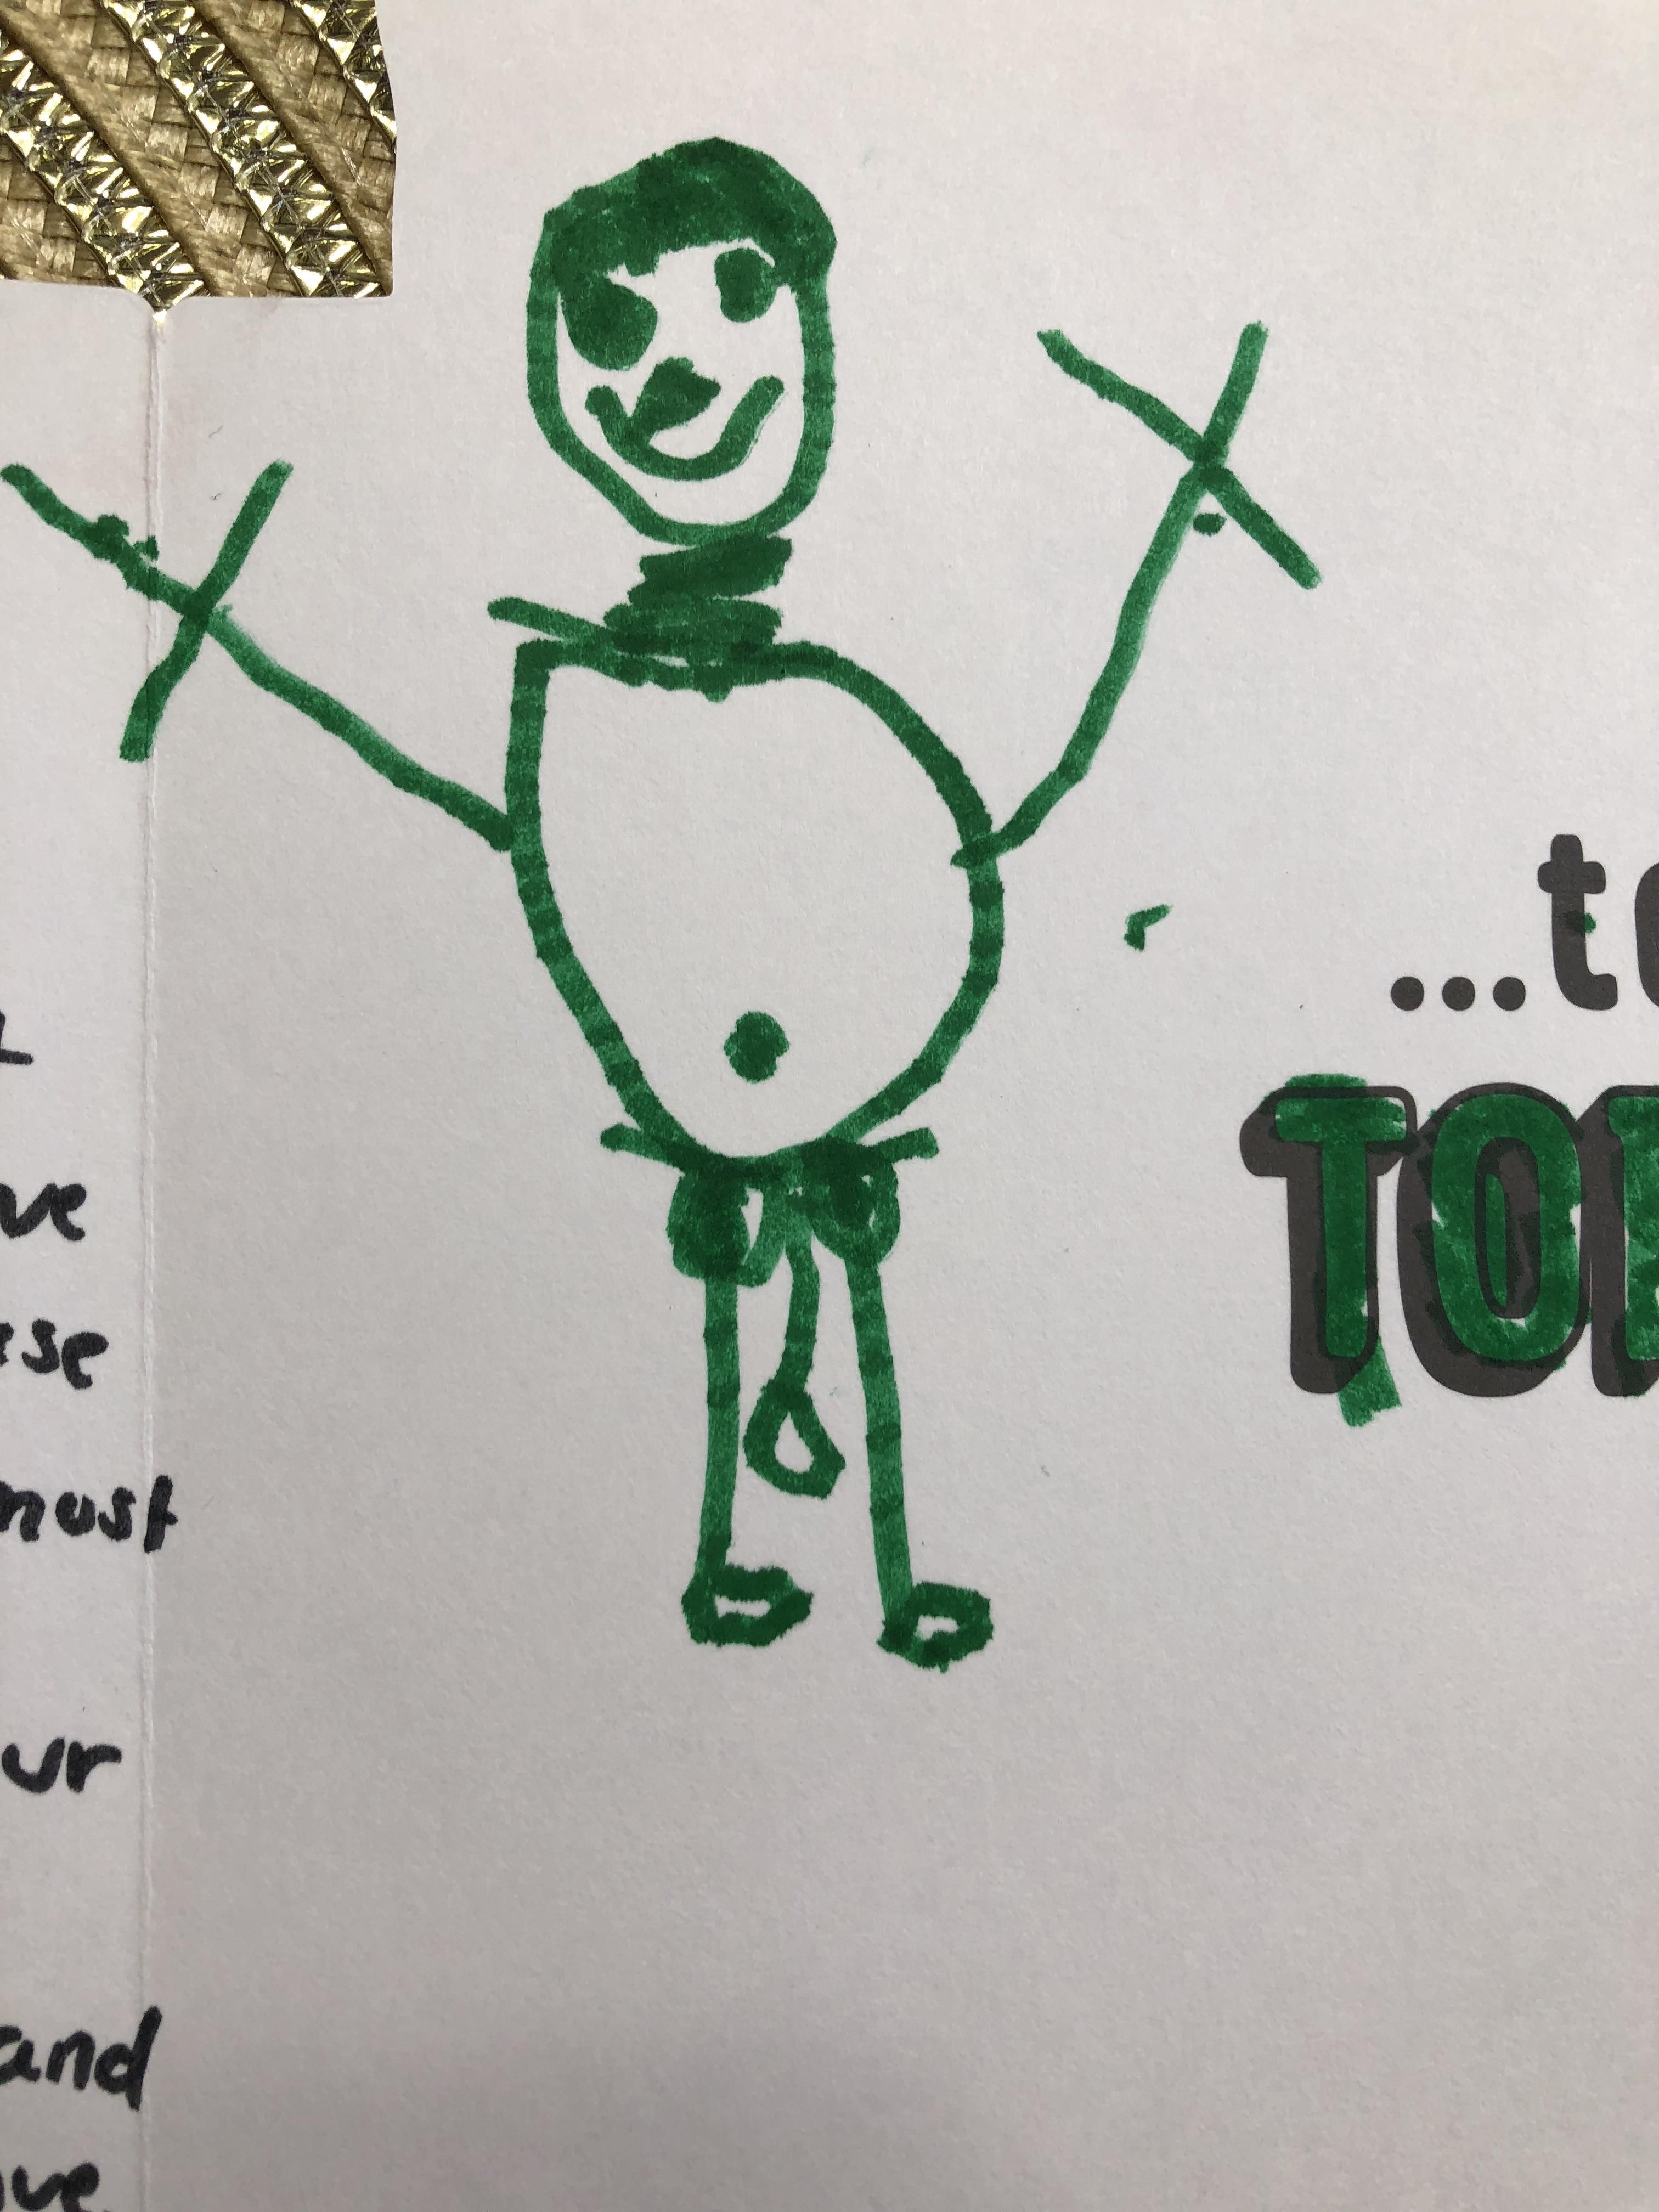 My 5-year-old's drawing of me on my Father's day card